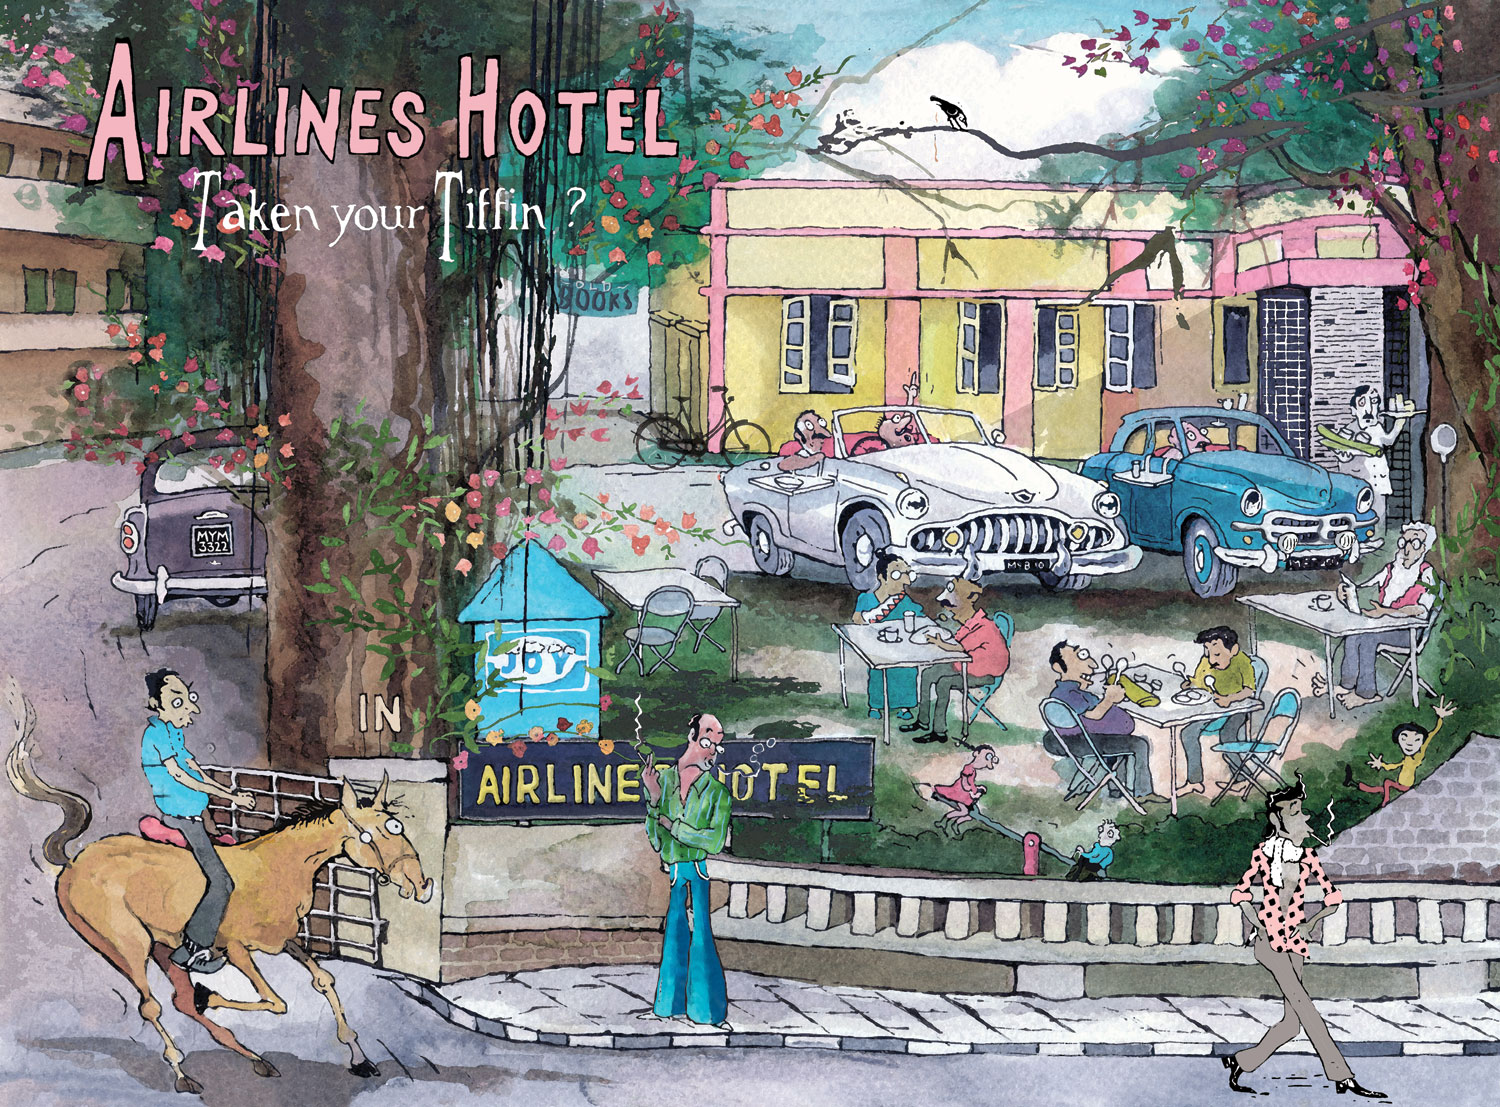 Airlines hotel is written in the top left. background has yellow and pink building, two cars white and blue with people seated at tables ahead of the car. There are three men one on a horse (l), one smoking in front of a sign(m) and a man walking in a polka dotted shirt and smoking(r).